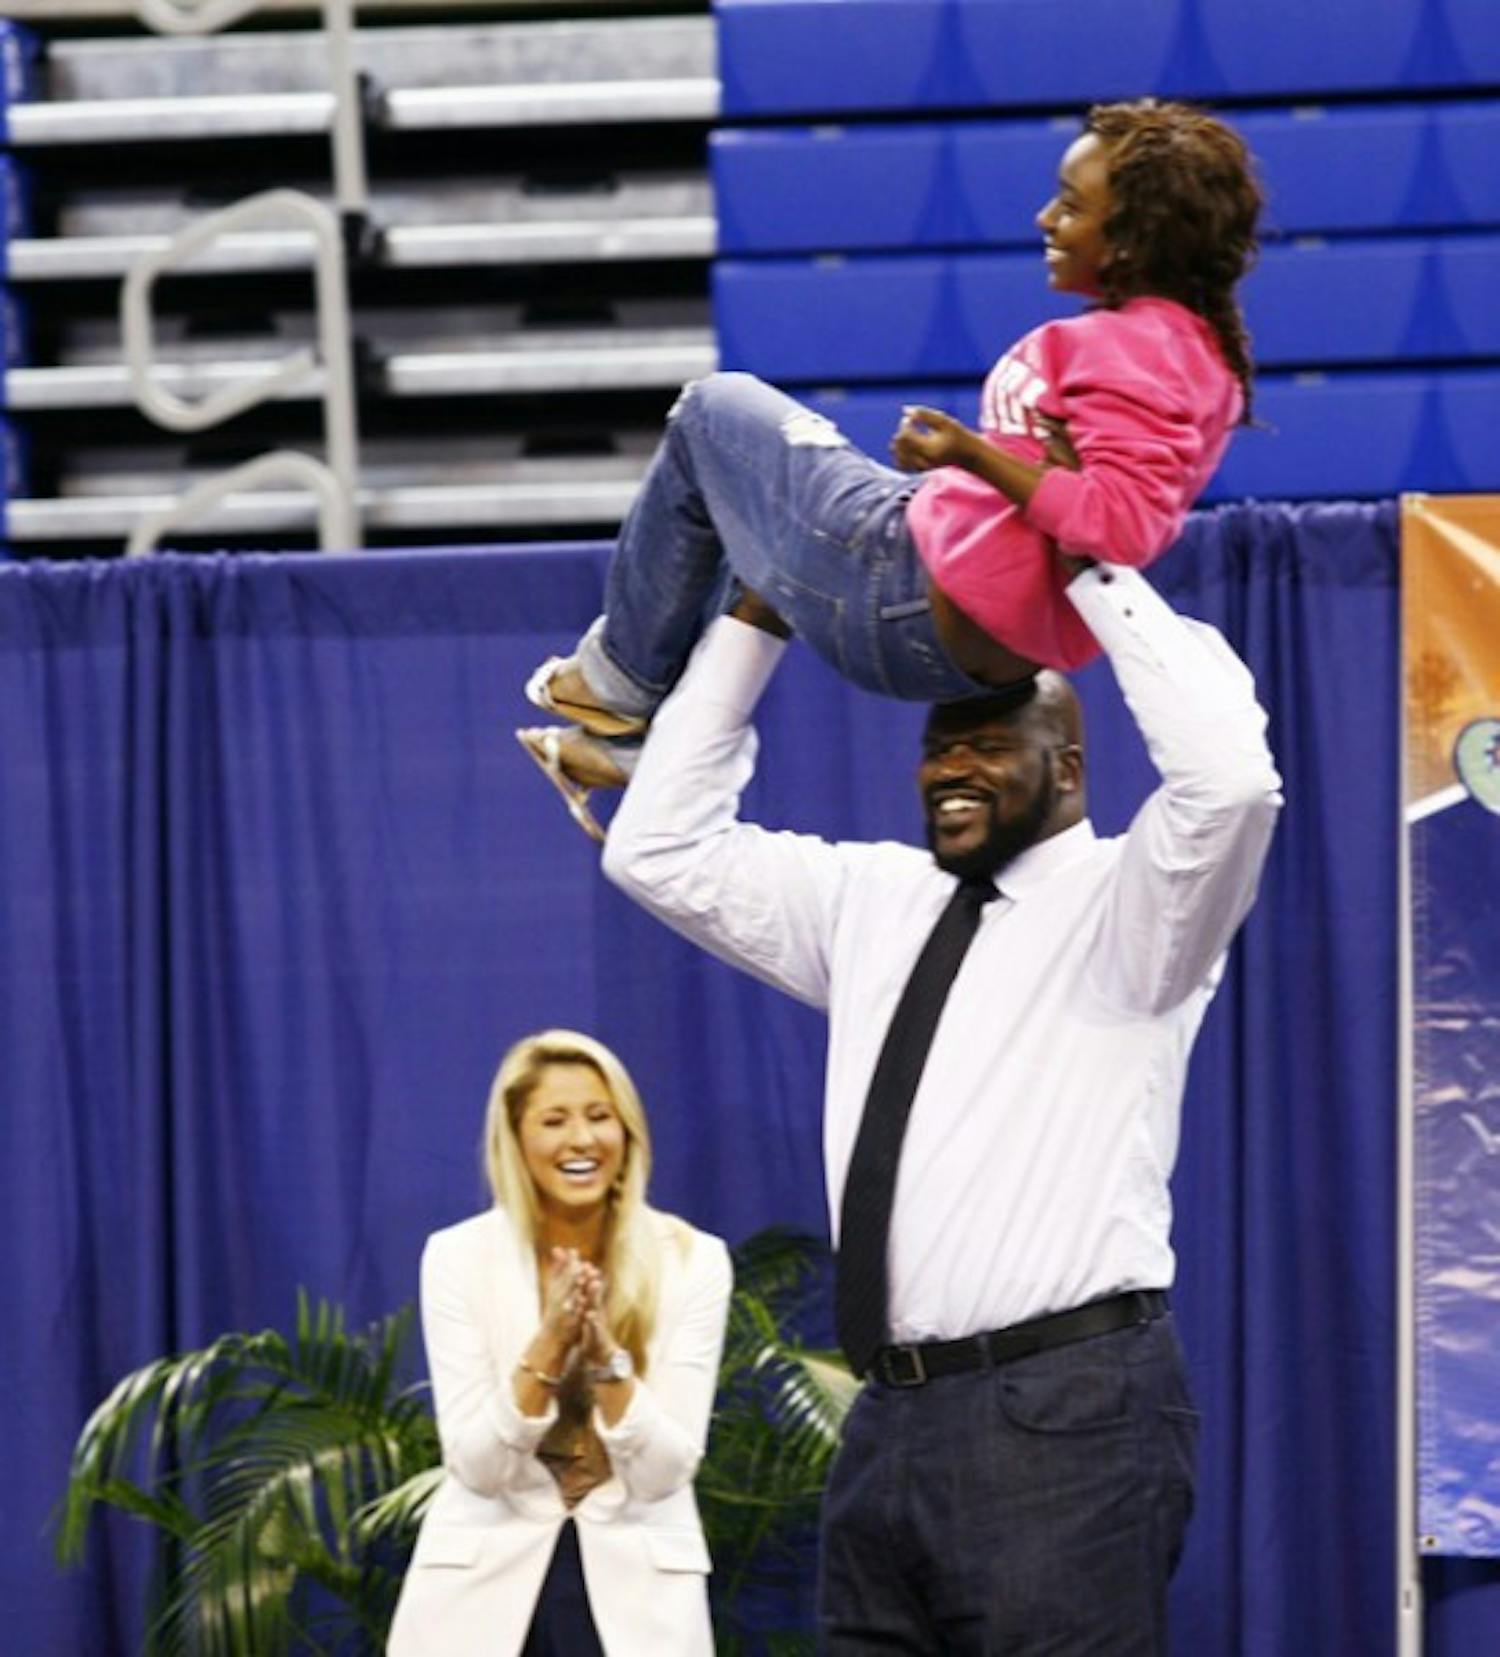 Shaquille O'Neal lifts an audience member in celebration after she was crowned the "Dougie" champion.